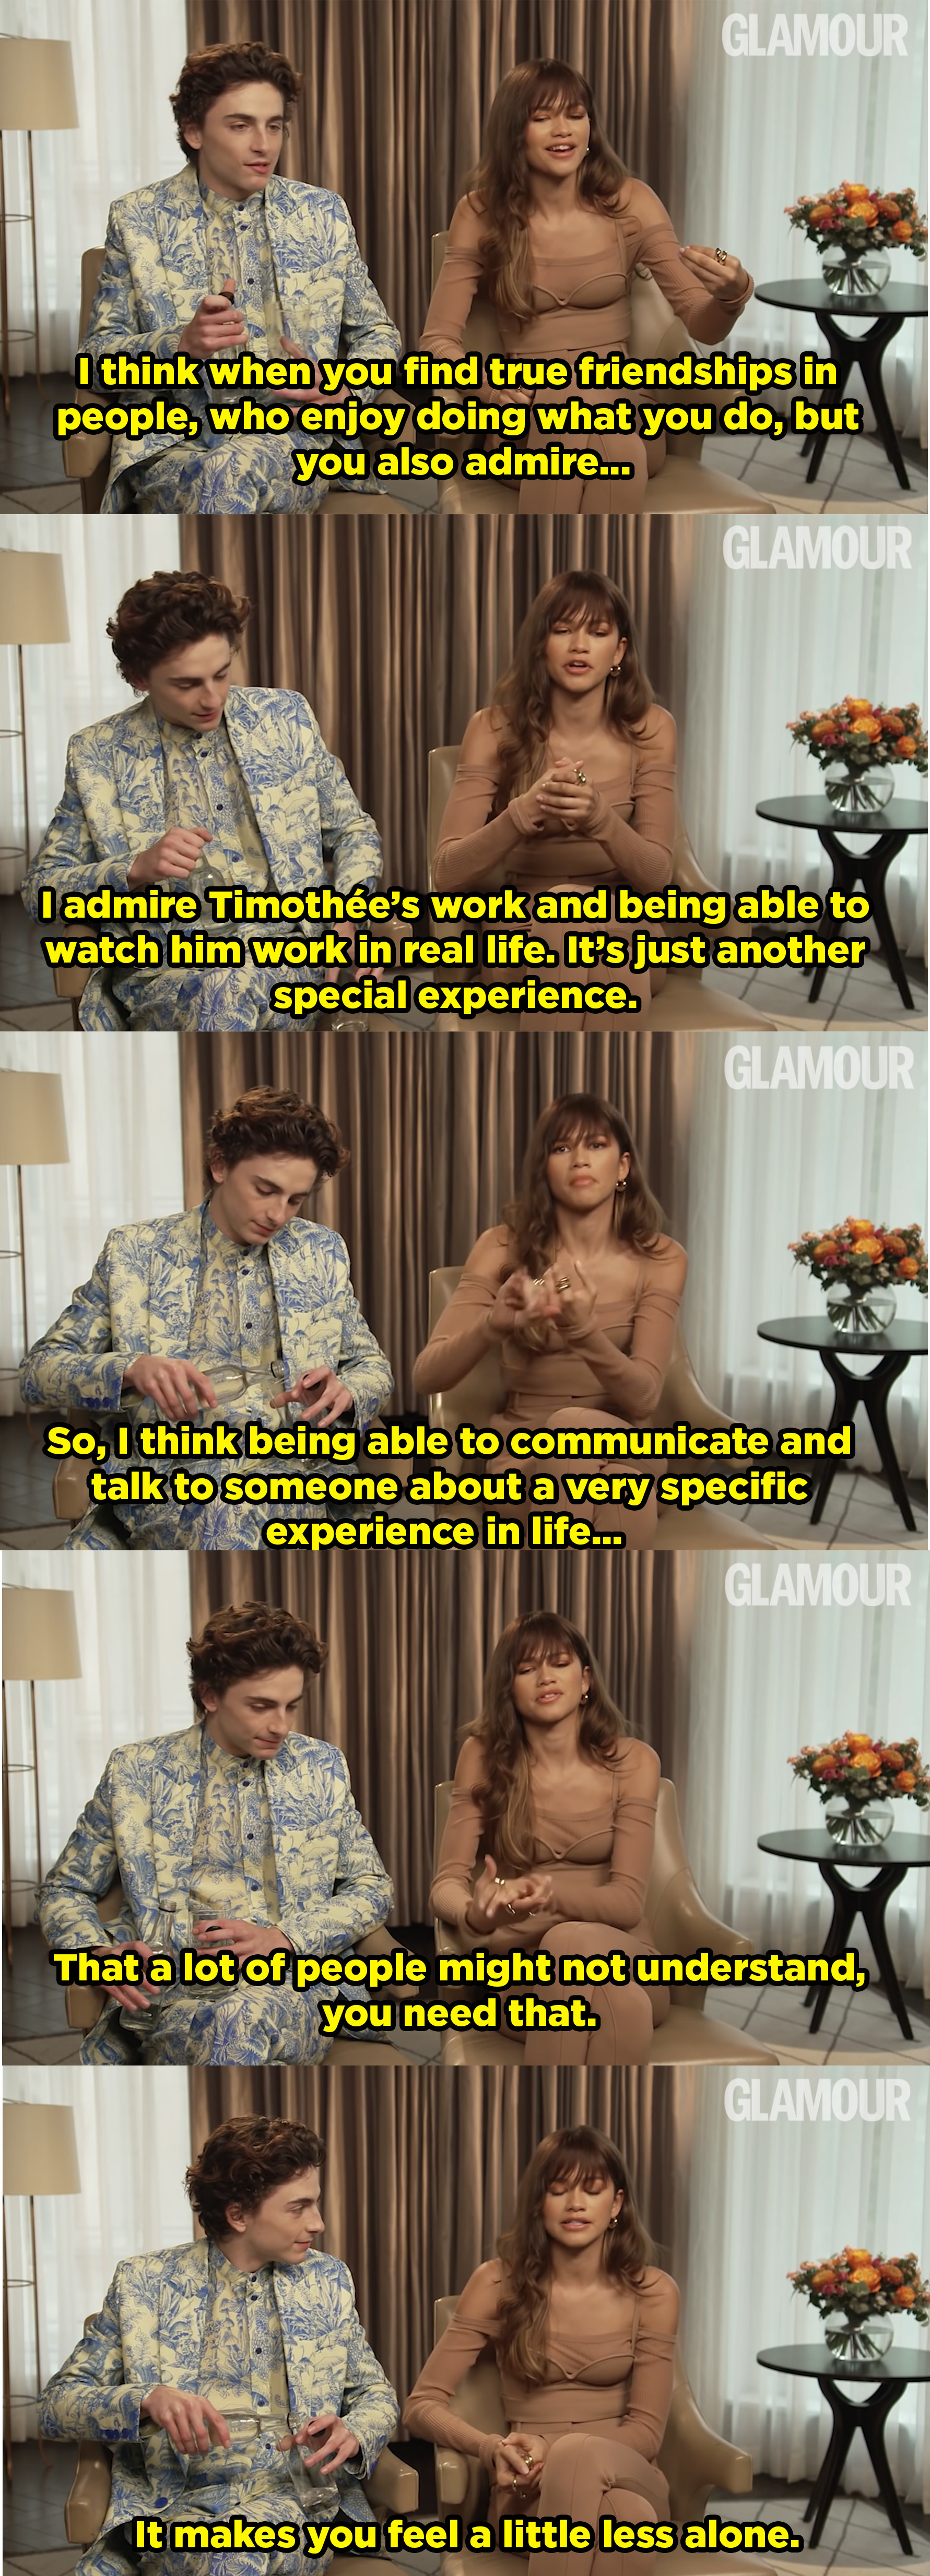 Zendaya talks about how being friends with Timmy makes her feel less alone. Meanwhile Timmy is trying to pour a glass of water without disrupting but makes it even more awkward because he&#x27;s trying not to be awkward.